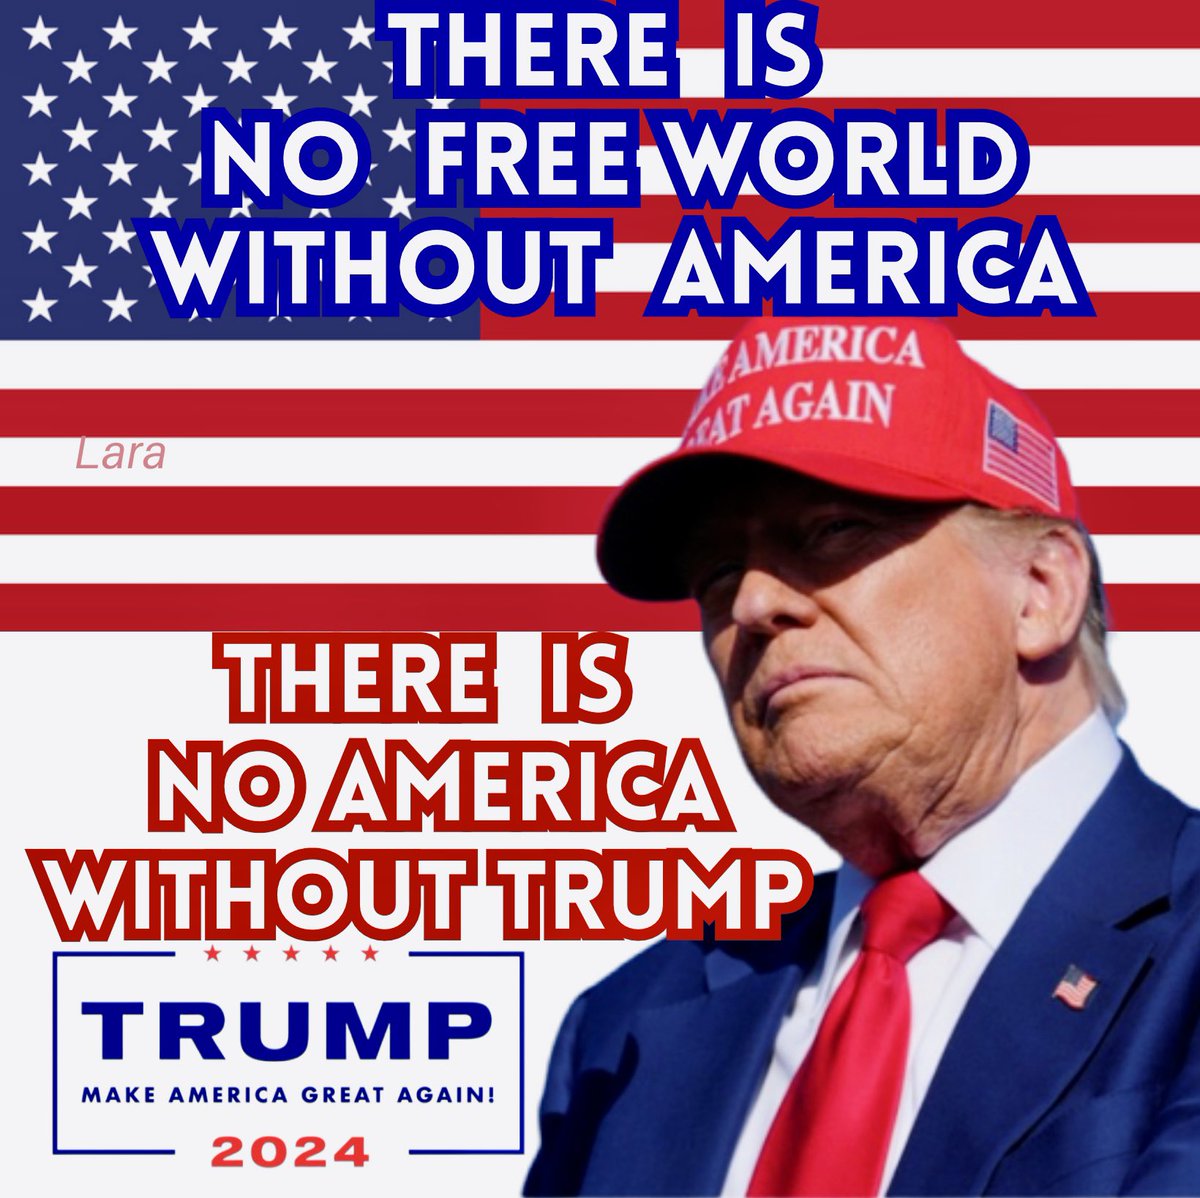 The most important election ever, for America and for the entire world!